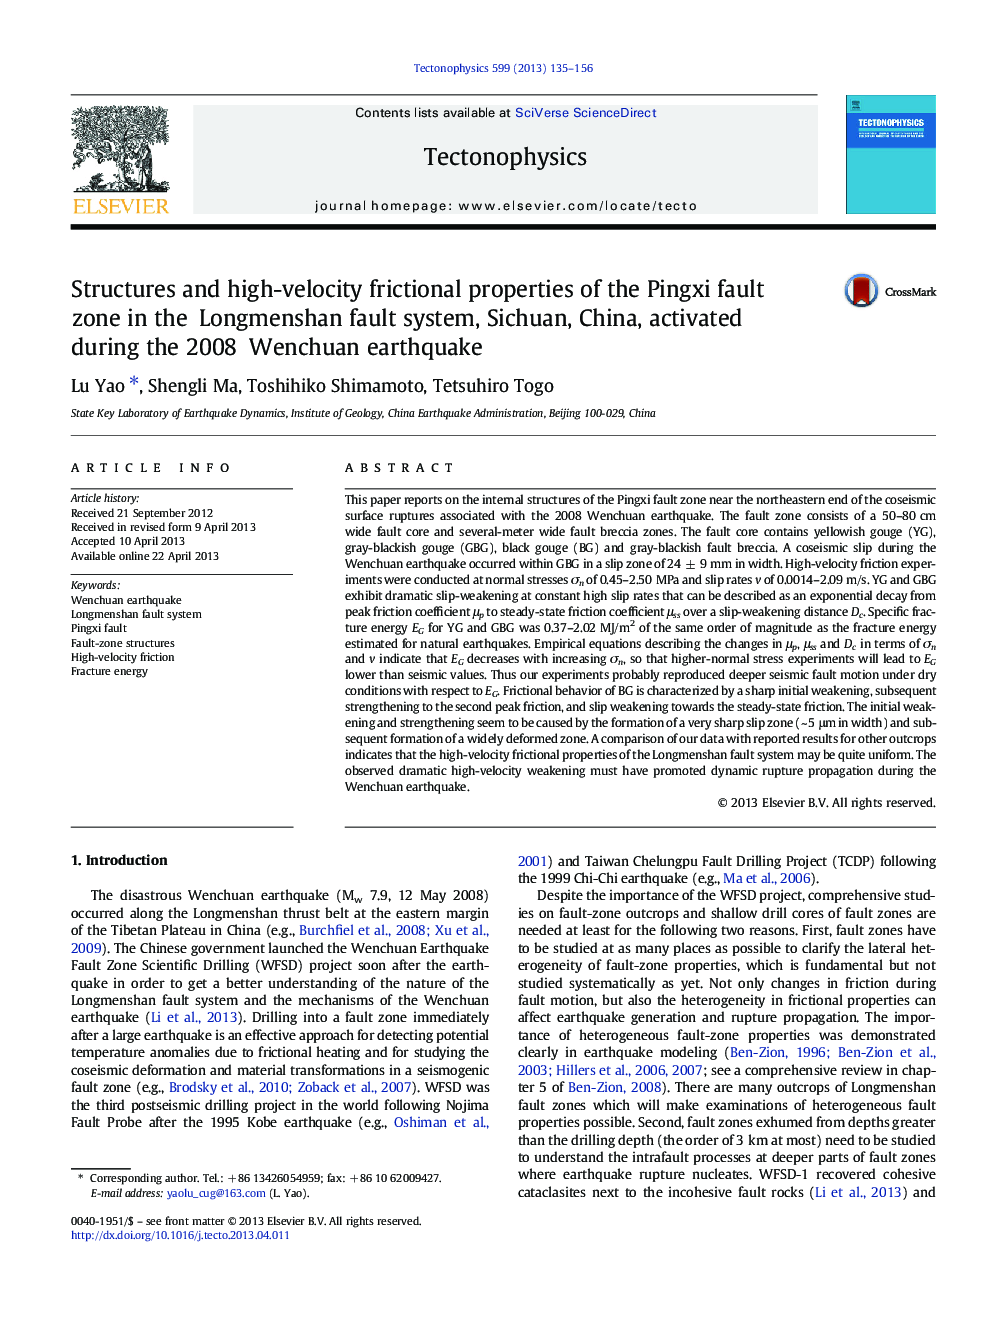 Structures and high-velocity frictional properties of the Pingxi fault zone in the Longmenshan fault system, Sichuan, China, activated during the 2008 Wenchuan earthquake